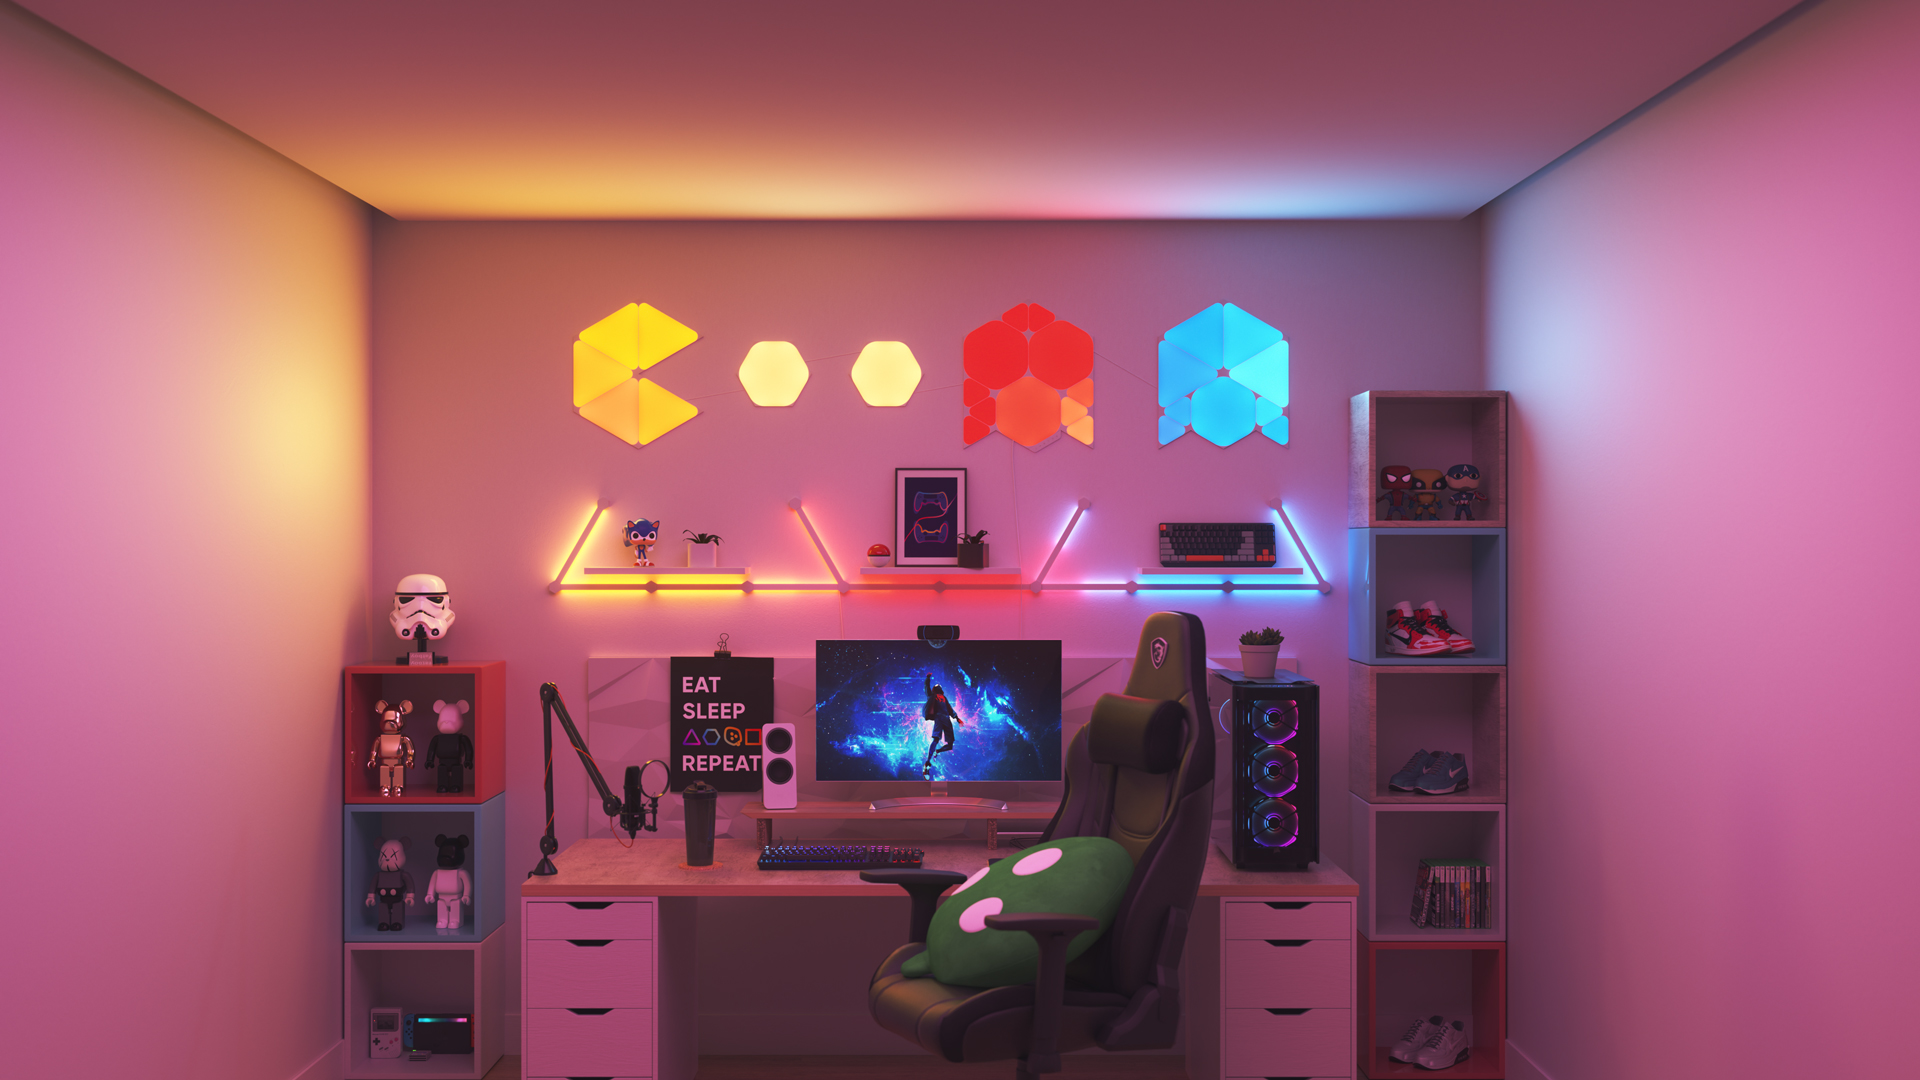 Nanoleaf Color Changing Panels Are Perfect For a Gaming Room